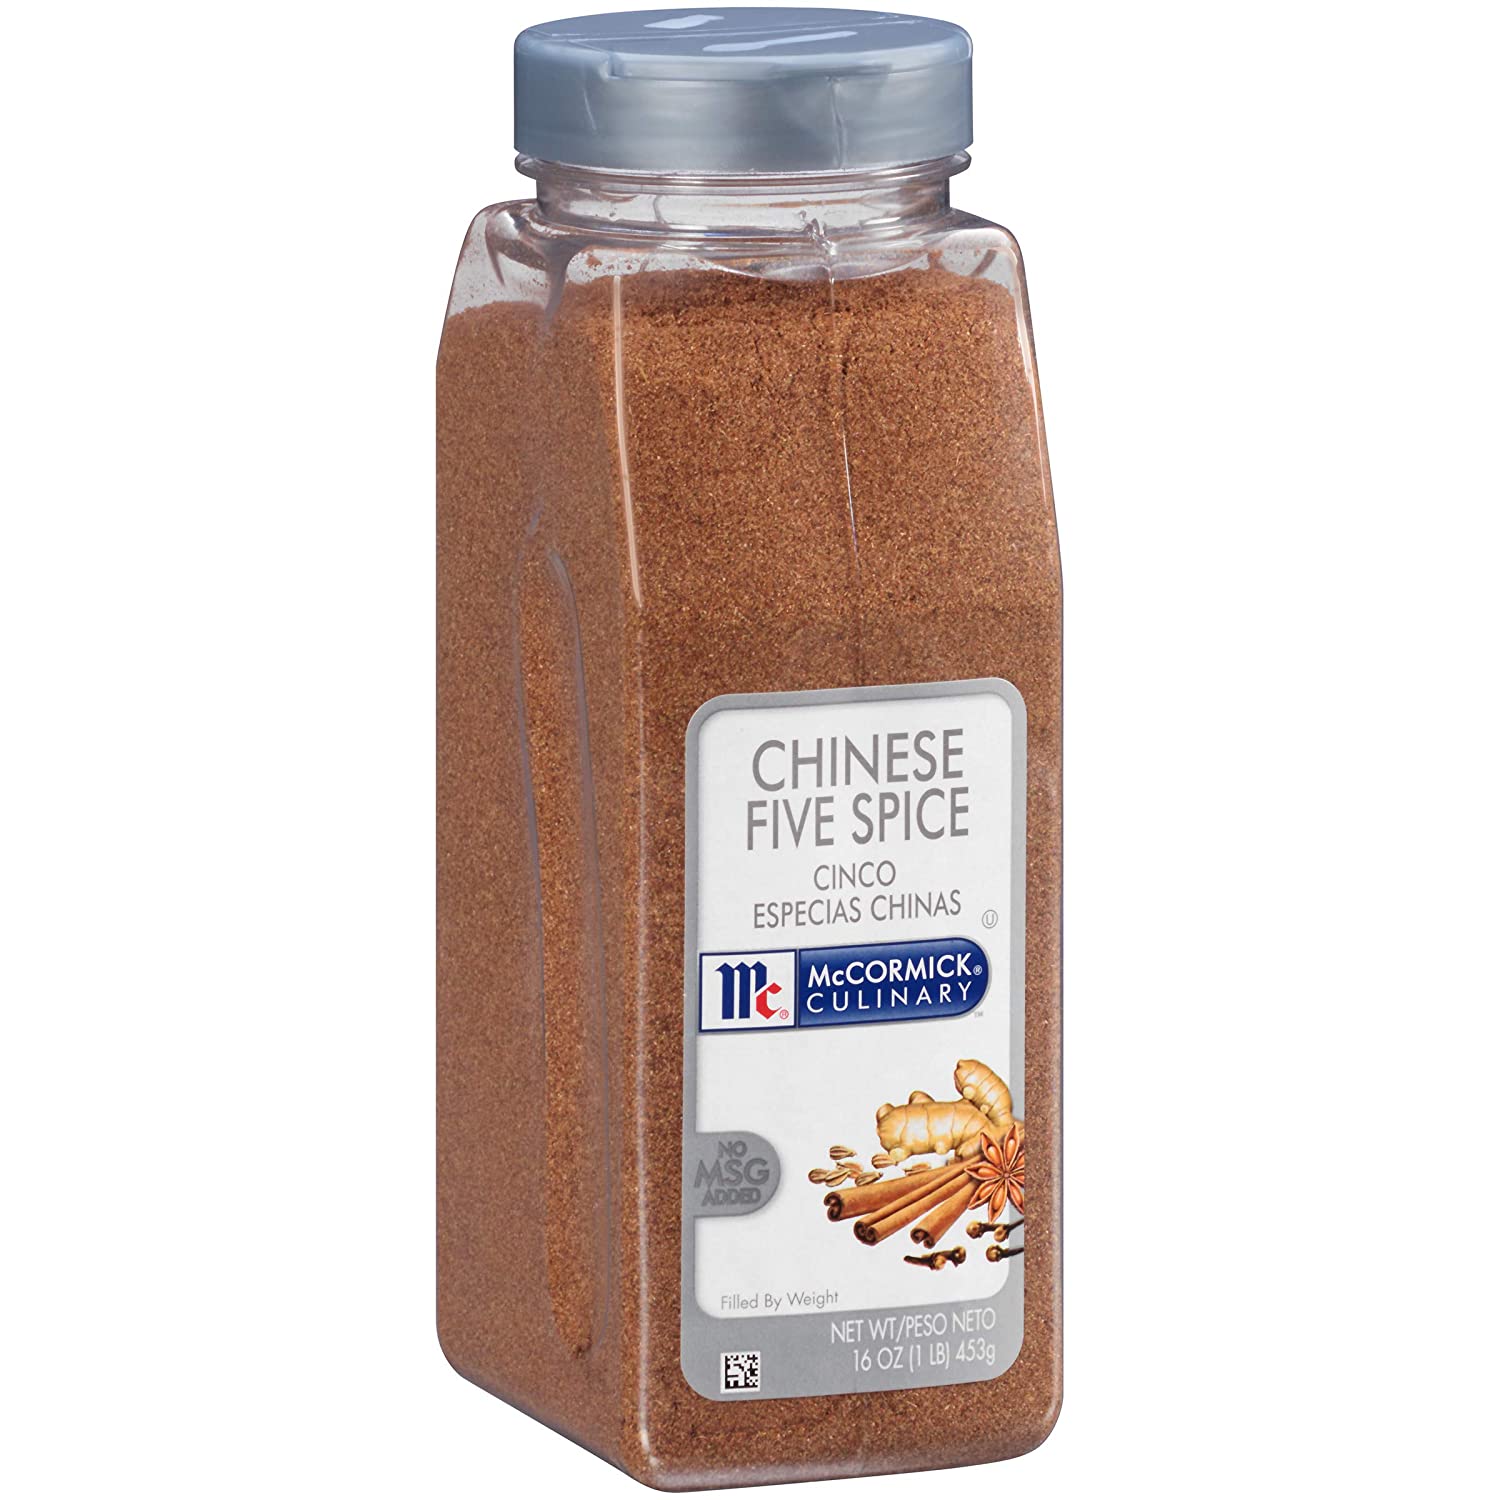 McCormick Culinary Chinese Five Spice